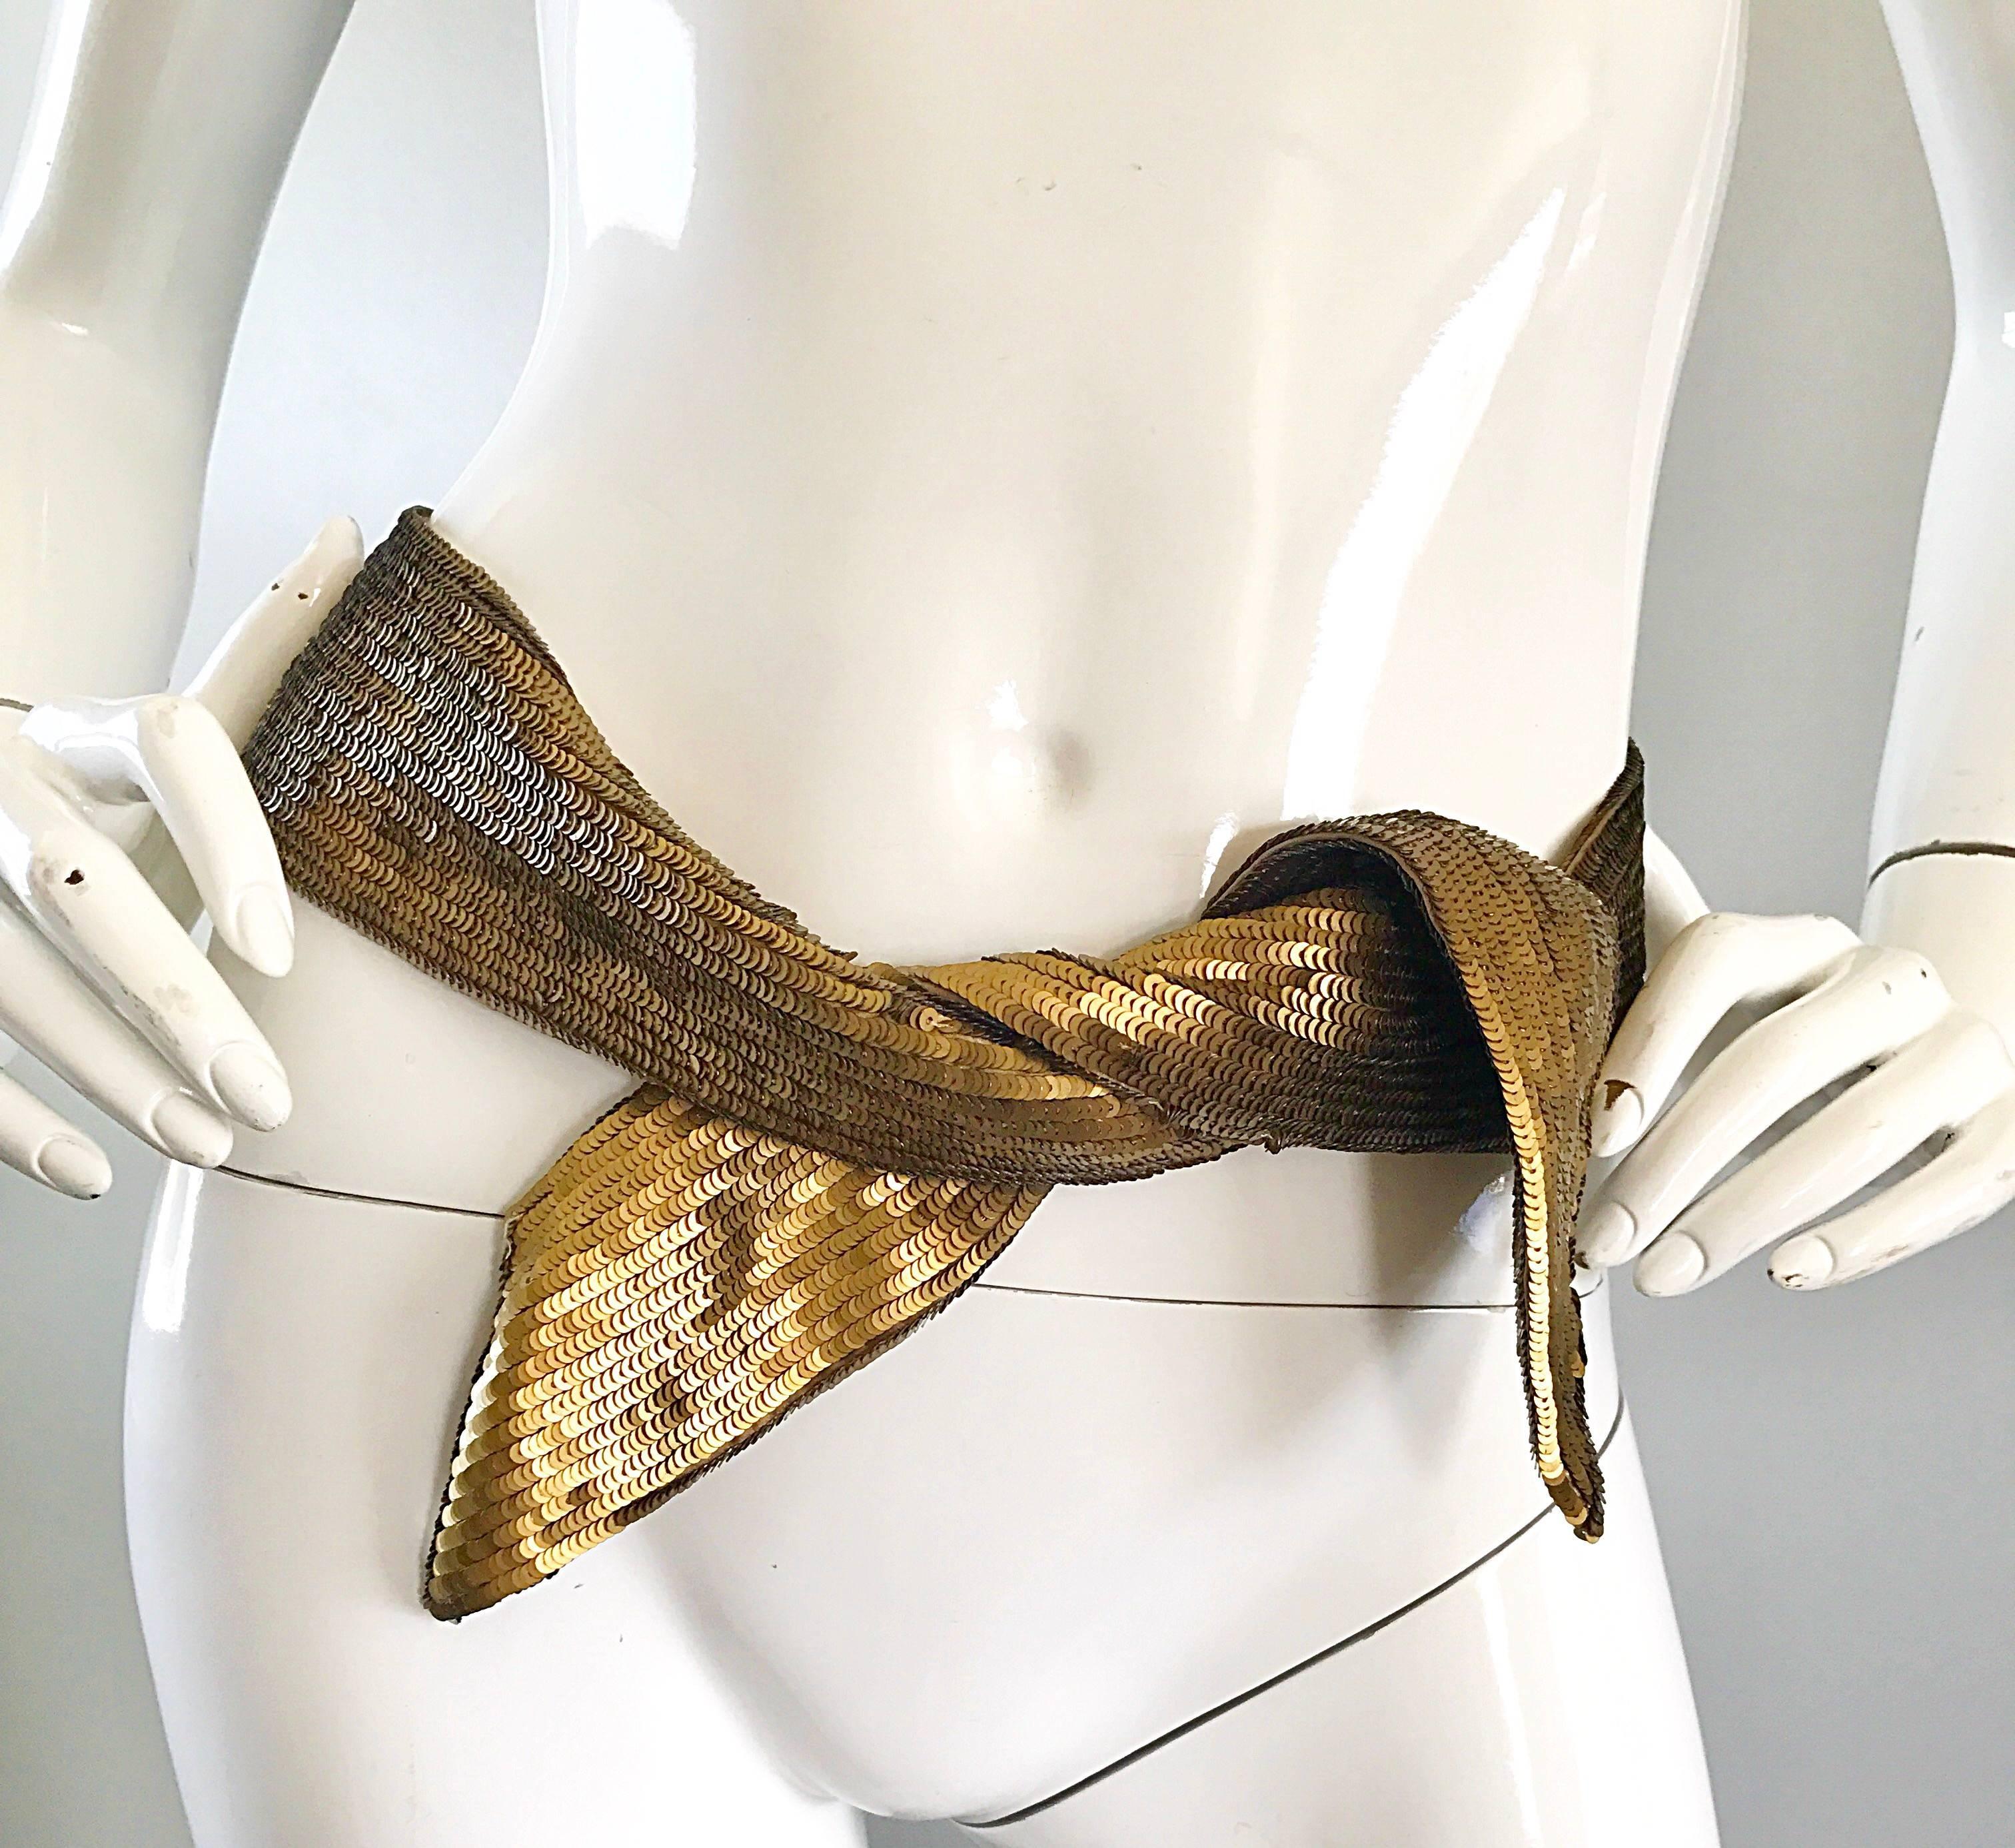 Brand new PROENZA SCHOULER golden bronze sequin sash belt! Features thousands of hand-sewn sequins on both the front and back of the belt. Extremely versatile piece that can really add a special touch to any outfit. Could even be used as a chic head